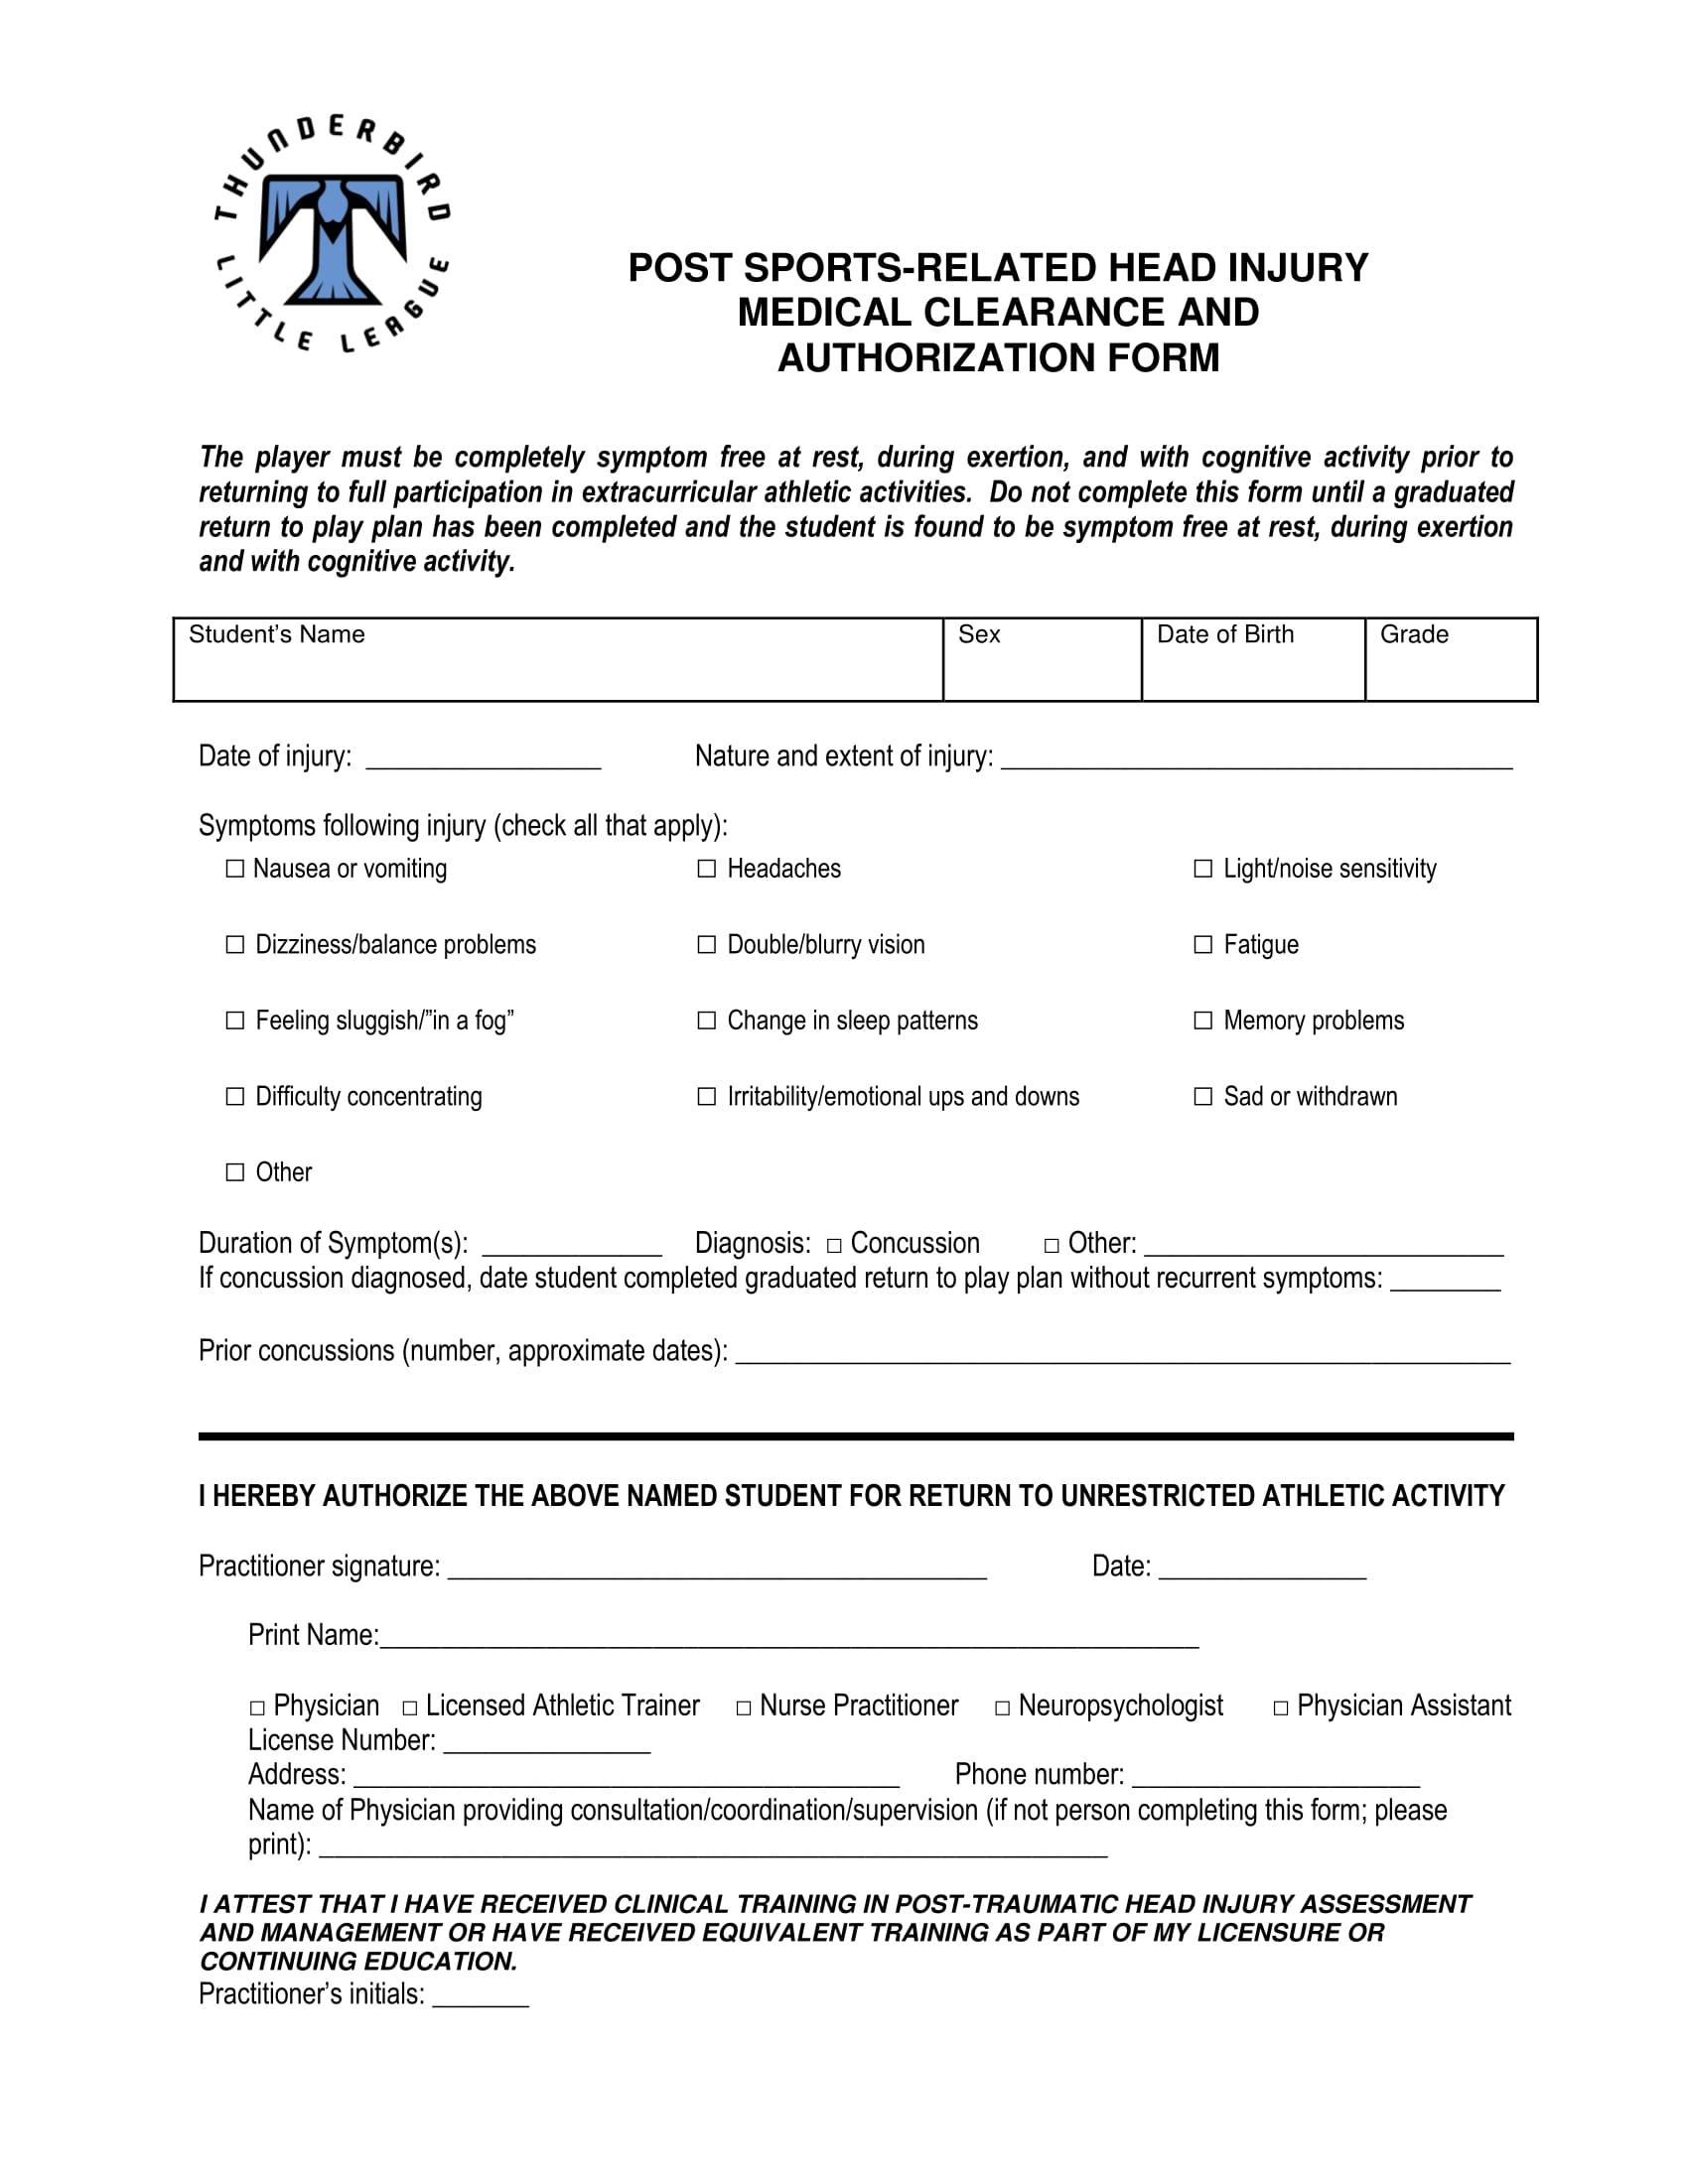 medical clearance authorization form 1